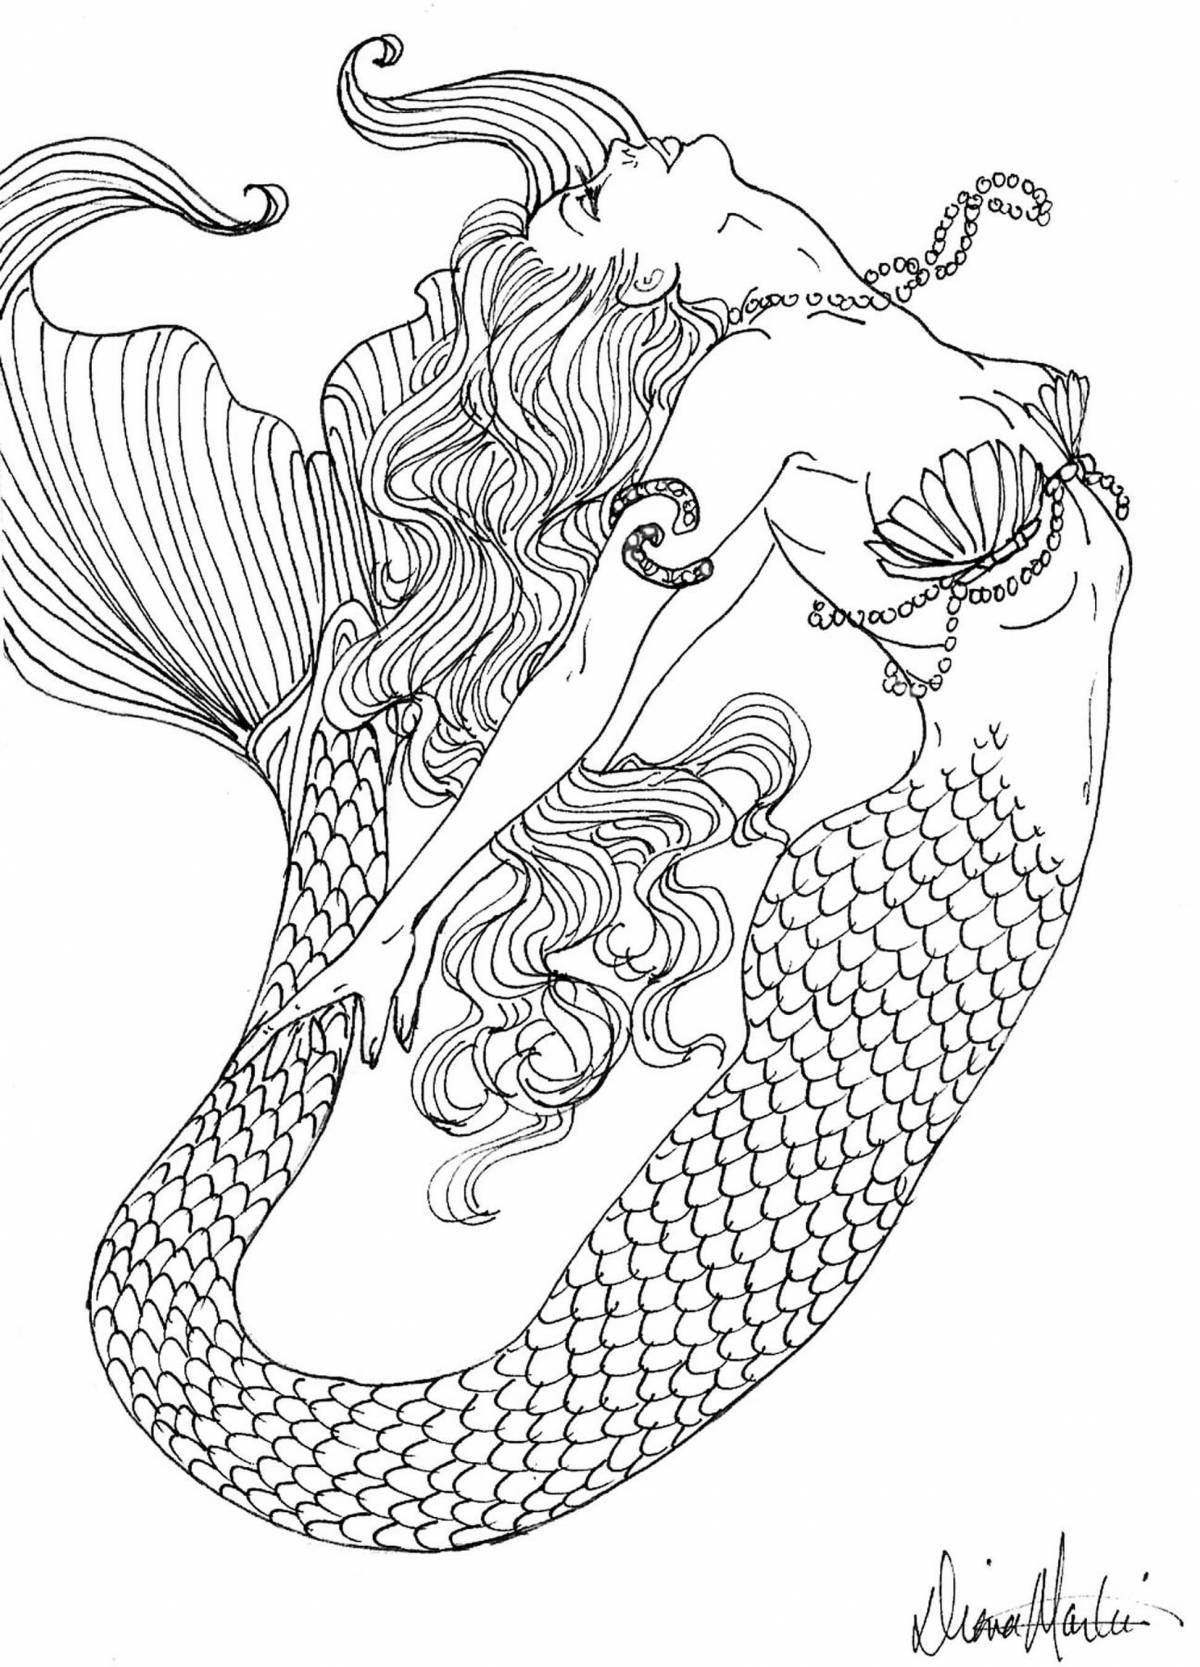 Adorable coloring picture of a mermaid